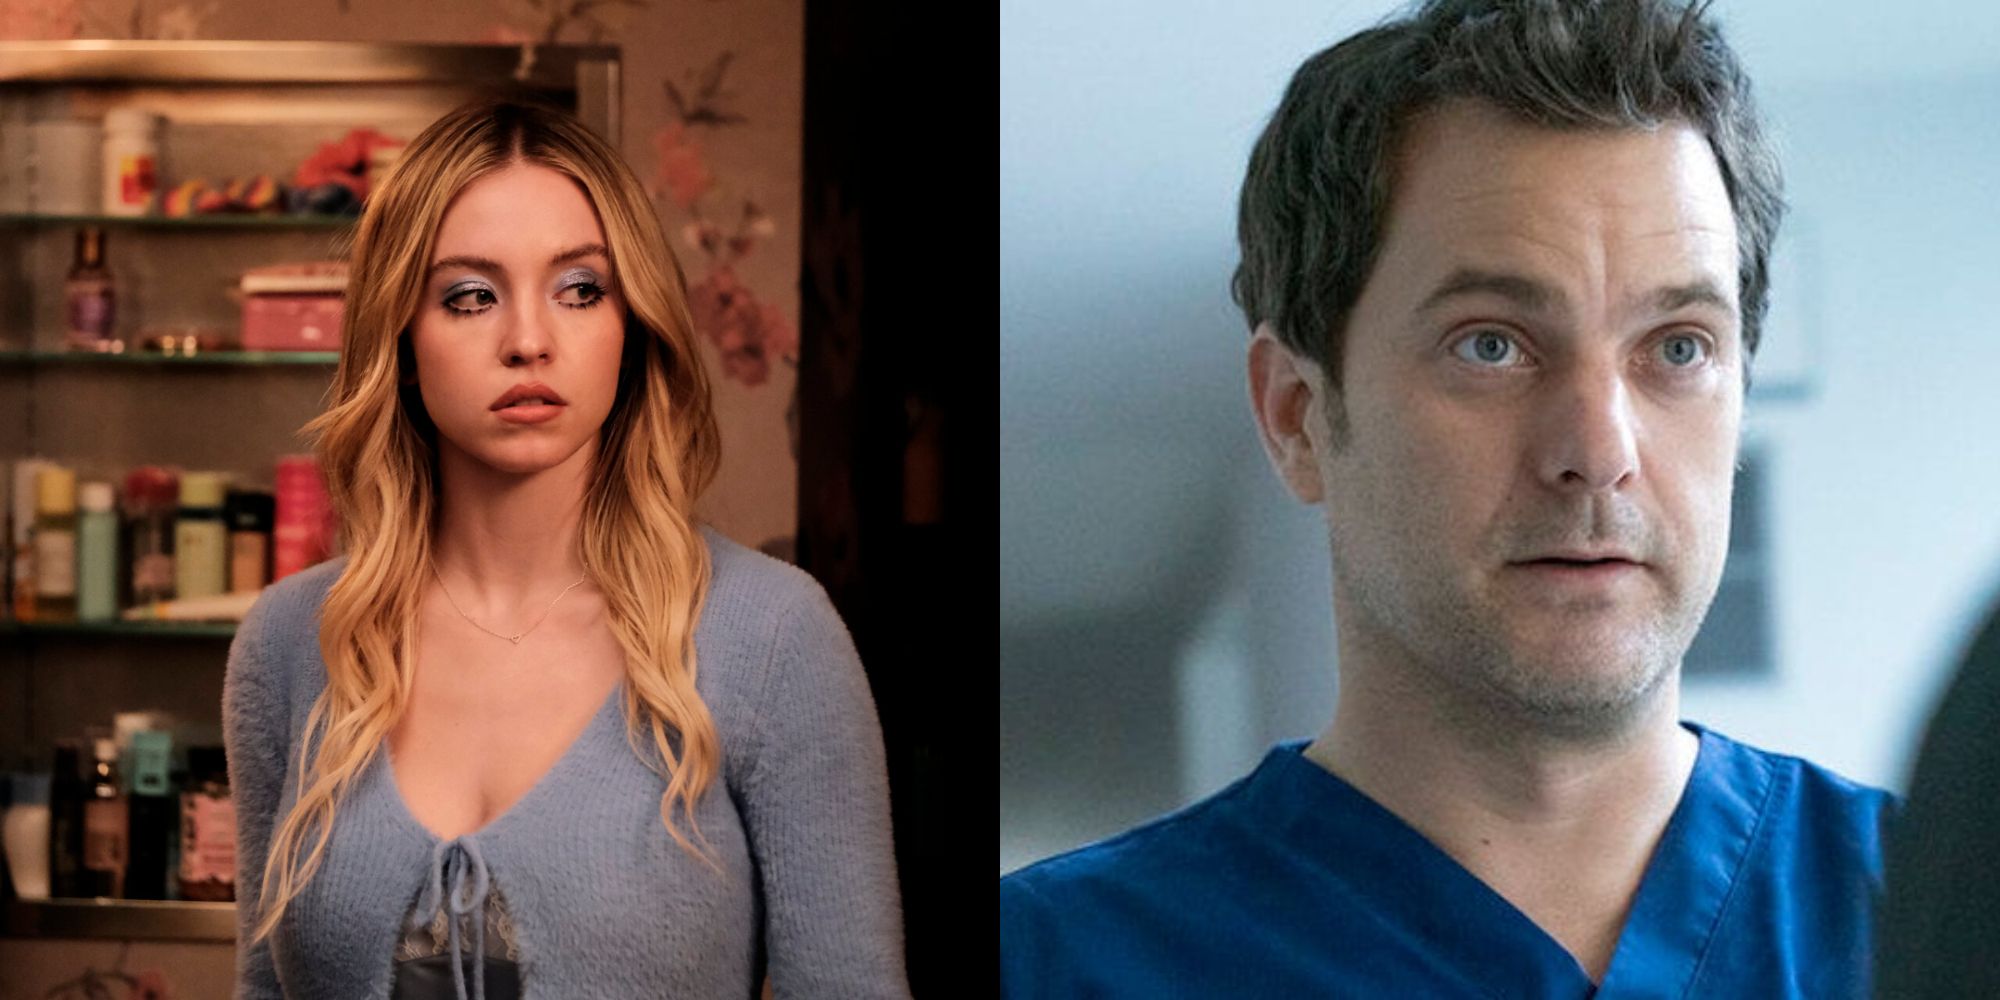 Split image showing Cassie in Euphoria and Christopher in Dr. Death.